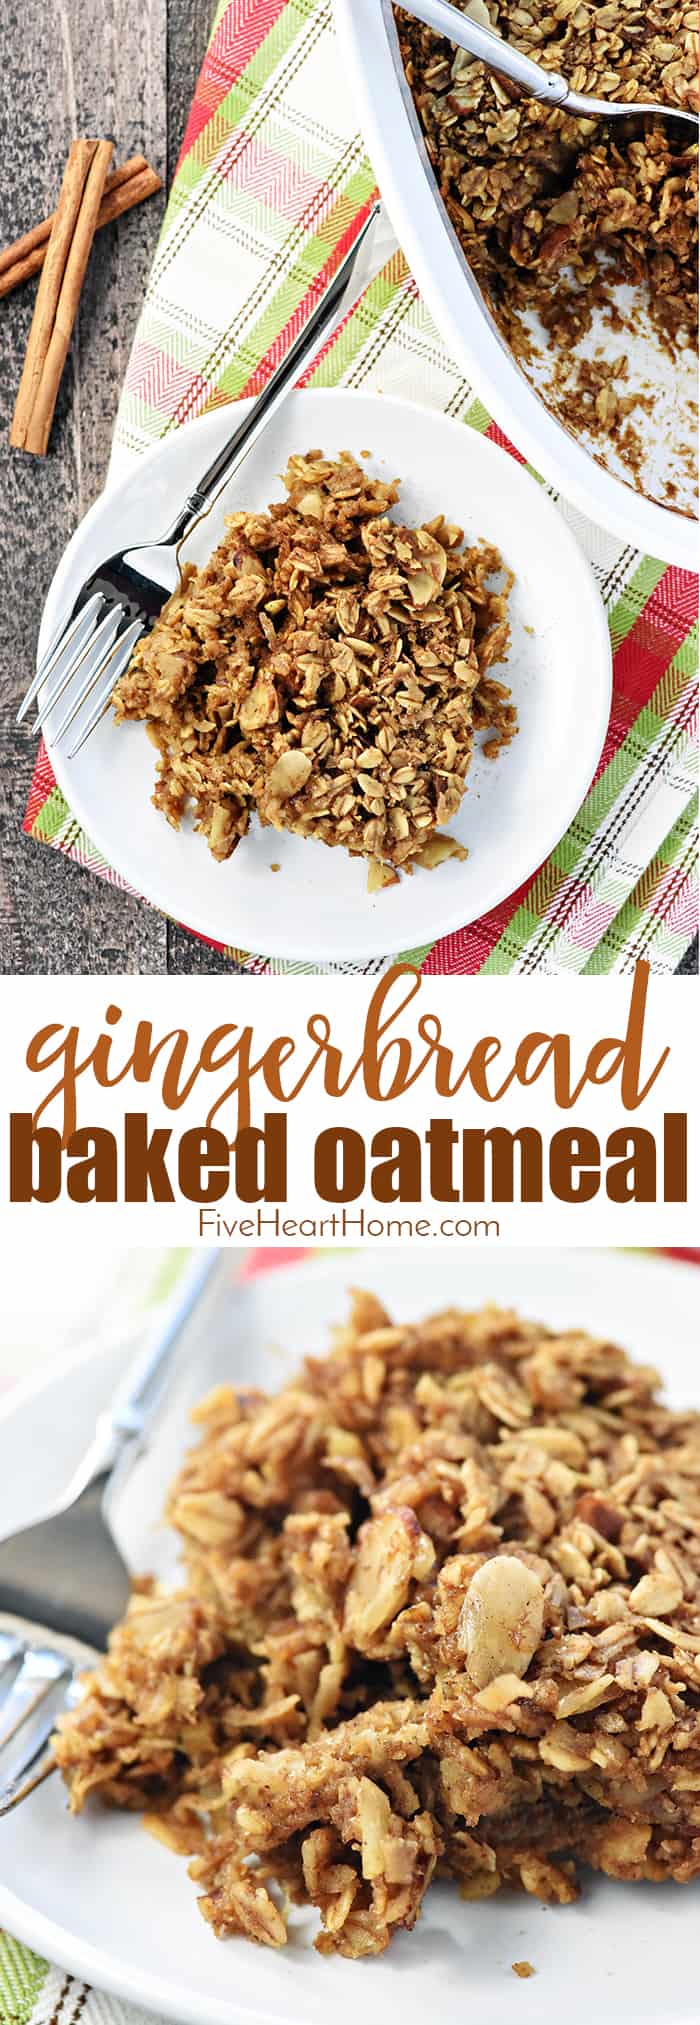 Gingerbread Baked Oatmeal Collage with Text Overlay 